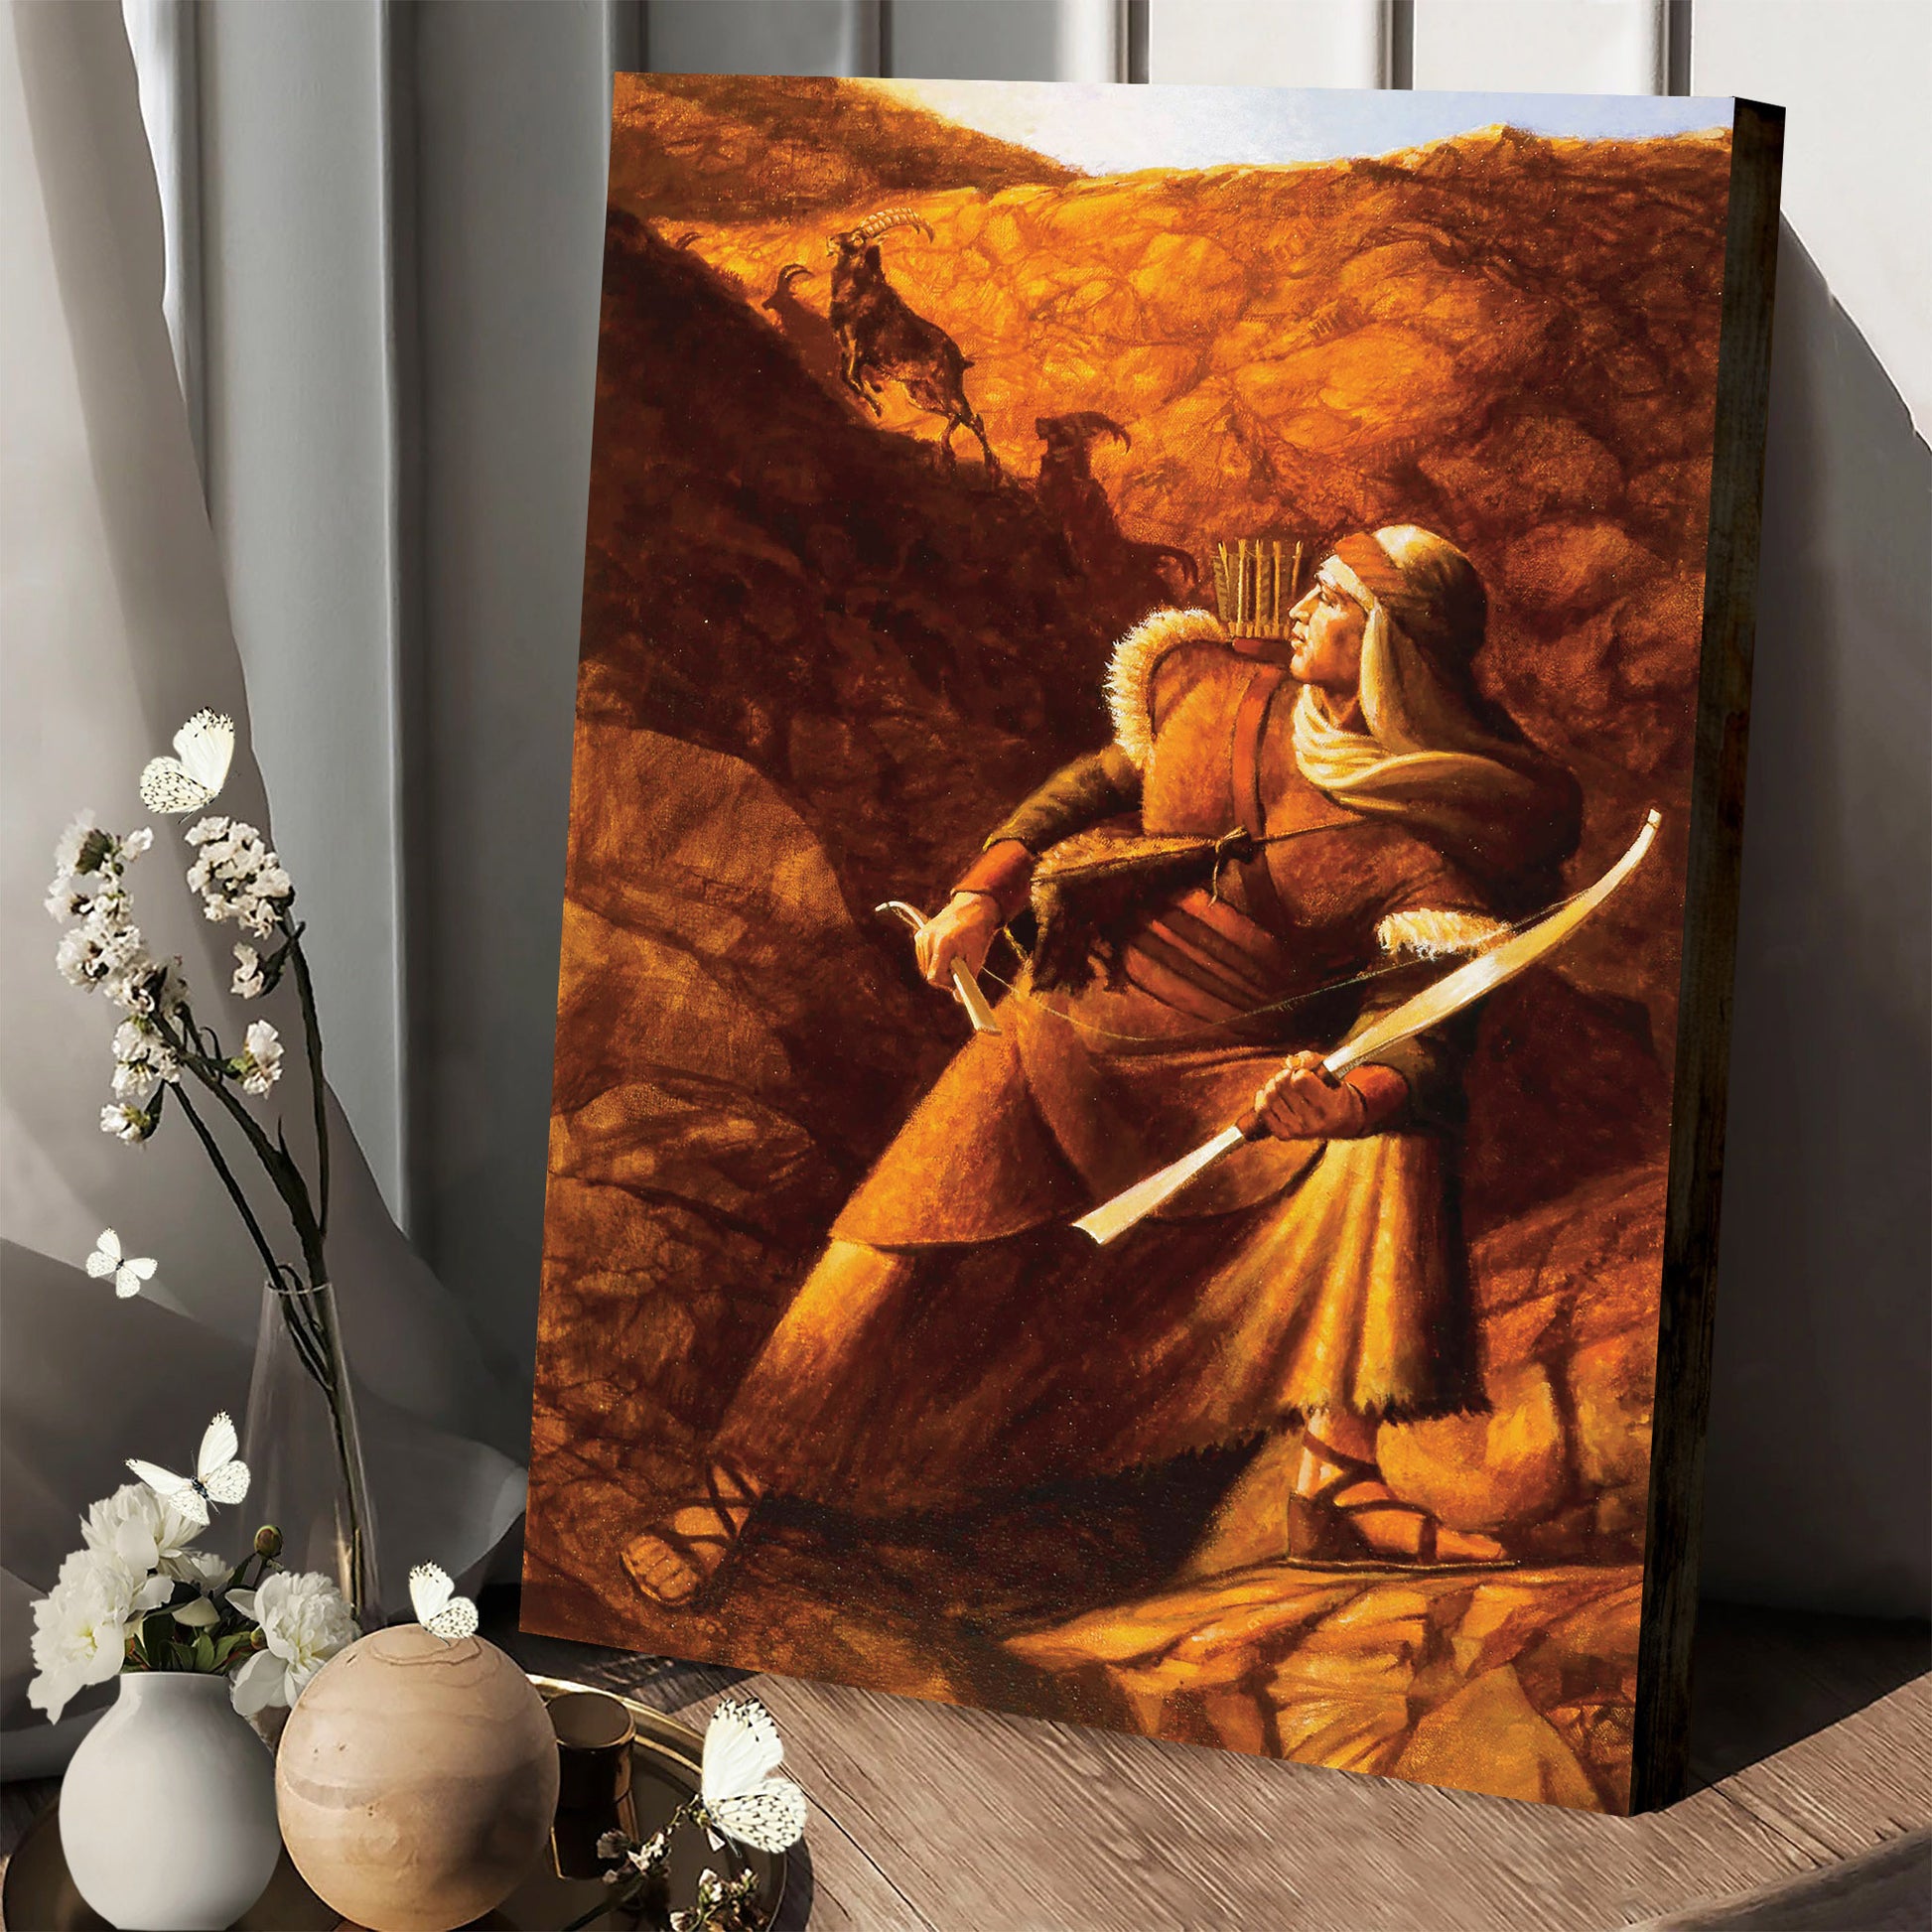 Nephi's Broken Bow Canvas Pictures - Religious Canvas Wall Art - Scriptures Wall Decor